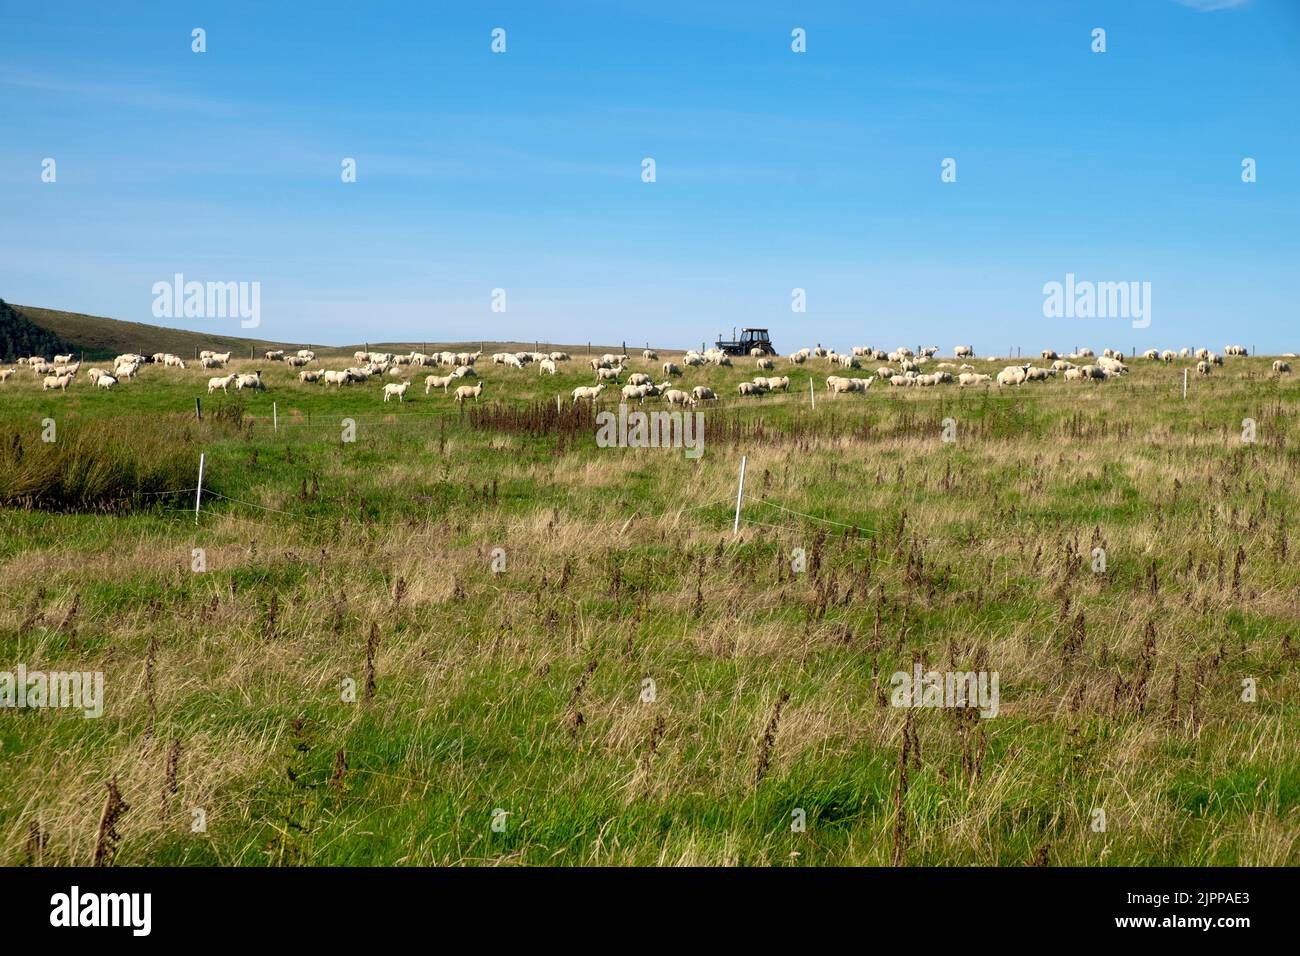 Flock of sheep grazing in field on Welsh upland farm and tractor blue sky farming landscape Carmarthenshire Wales UK Great Britain  KATHY DEWITT Stock Photo